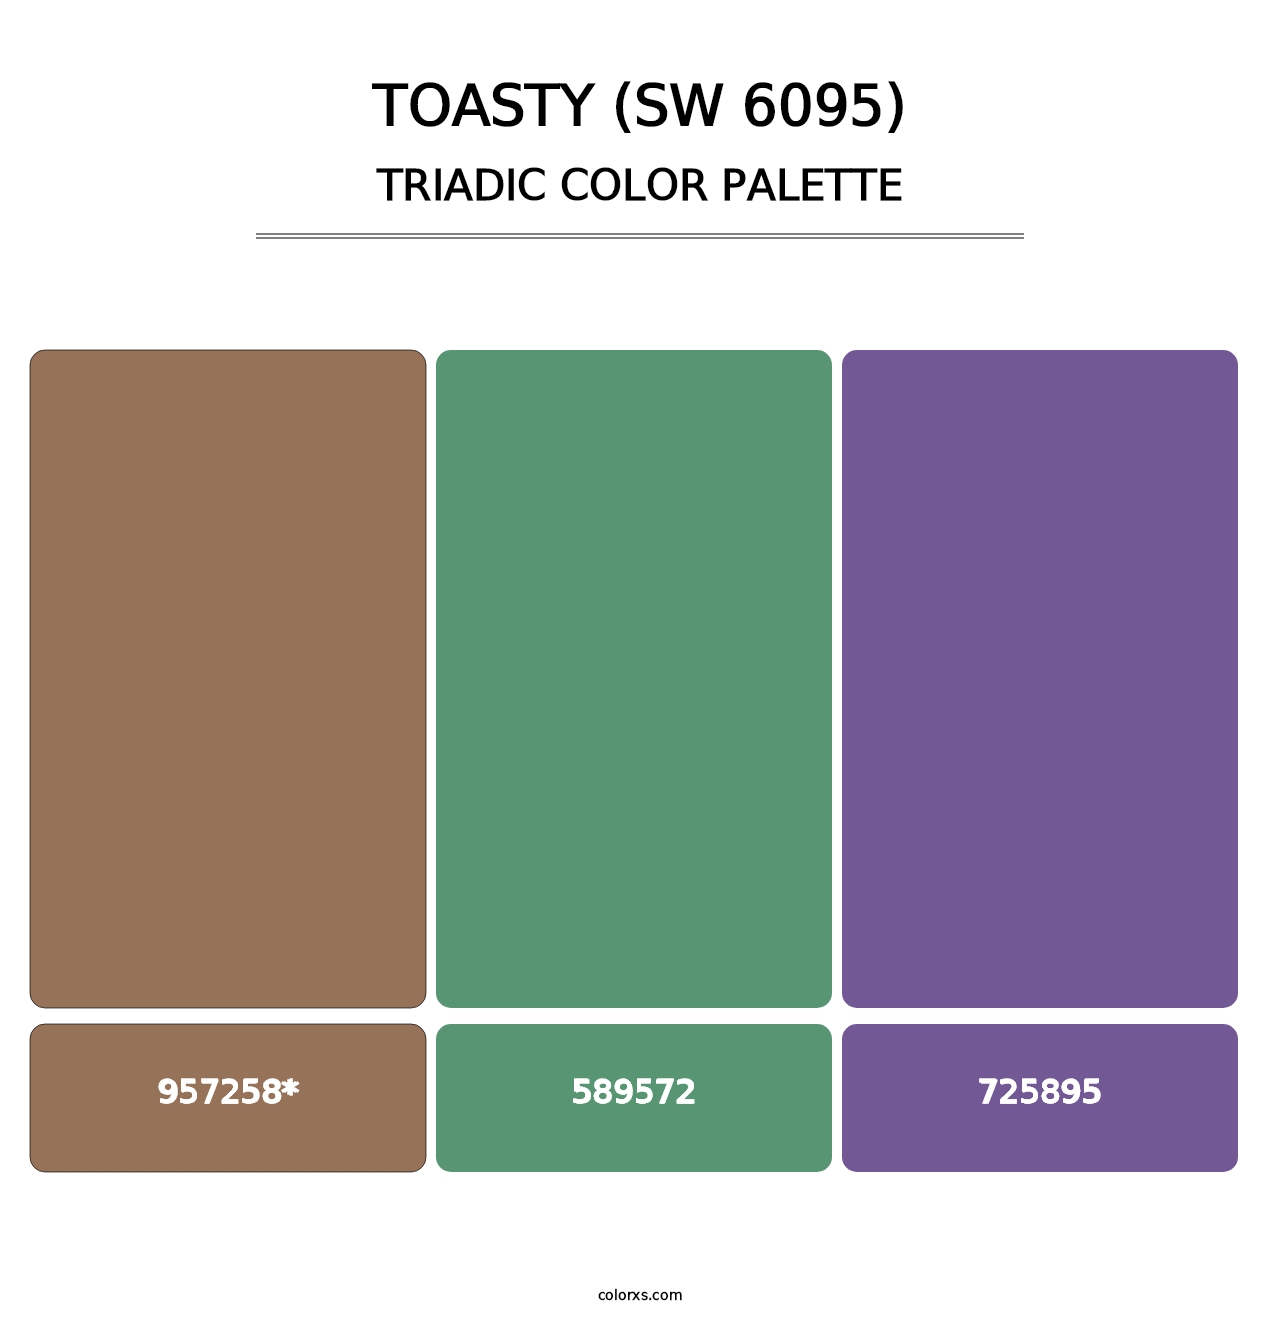 Toasty (SW 6095) - Triadic Color Palette